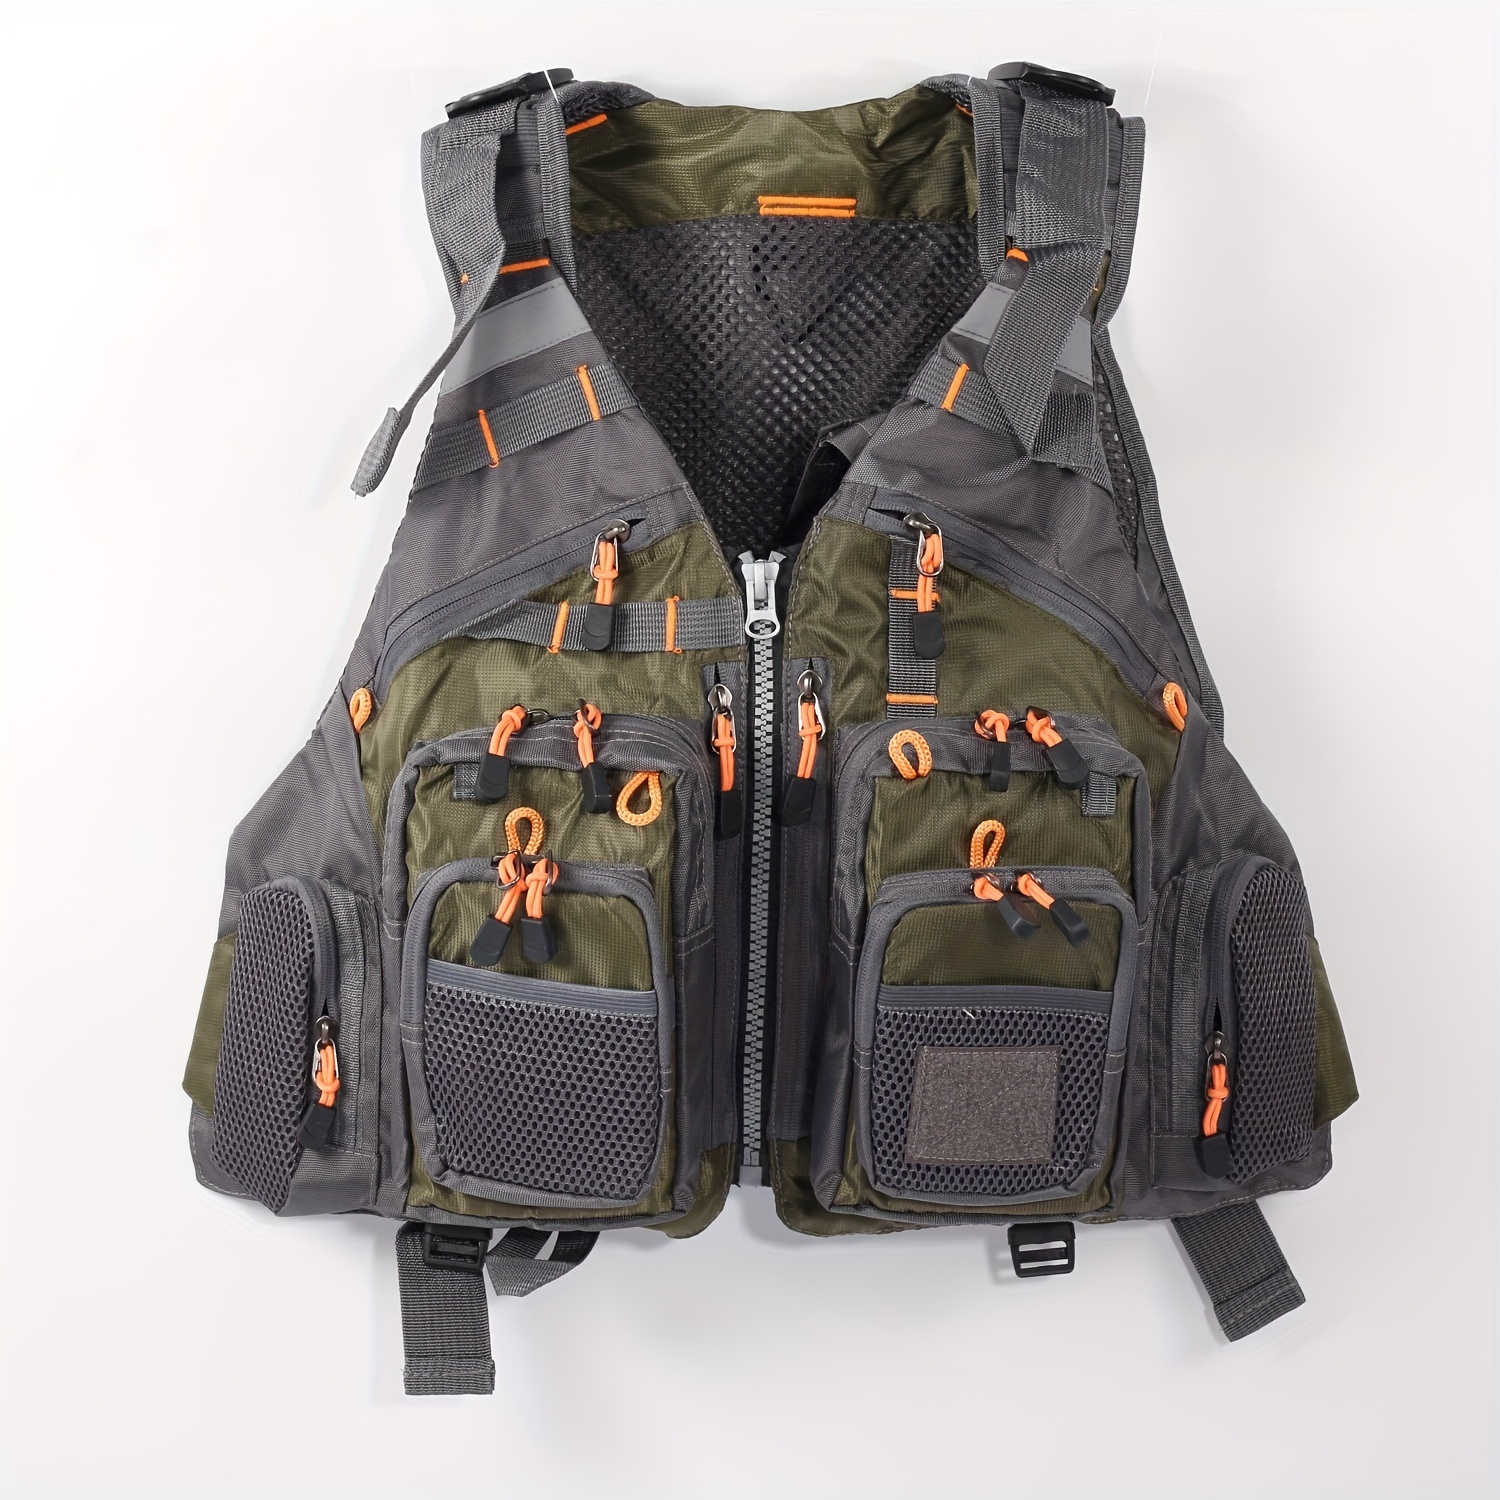 Adjustable Fishing Vest For Men And Women, For Fly Bass Fishing And Outdoor Activities,Gilet,Waistcoat